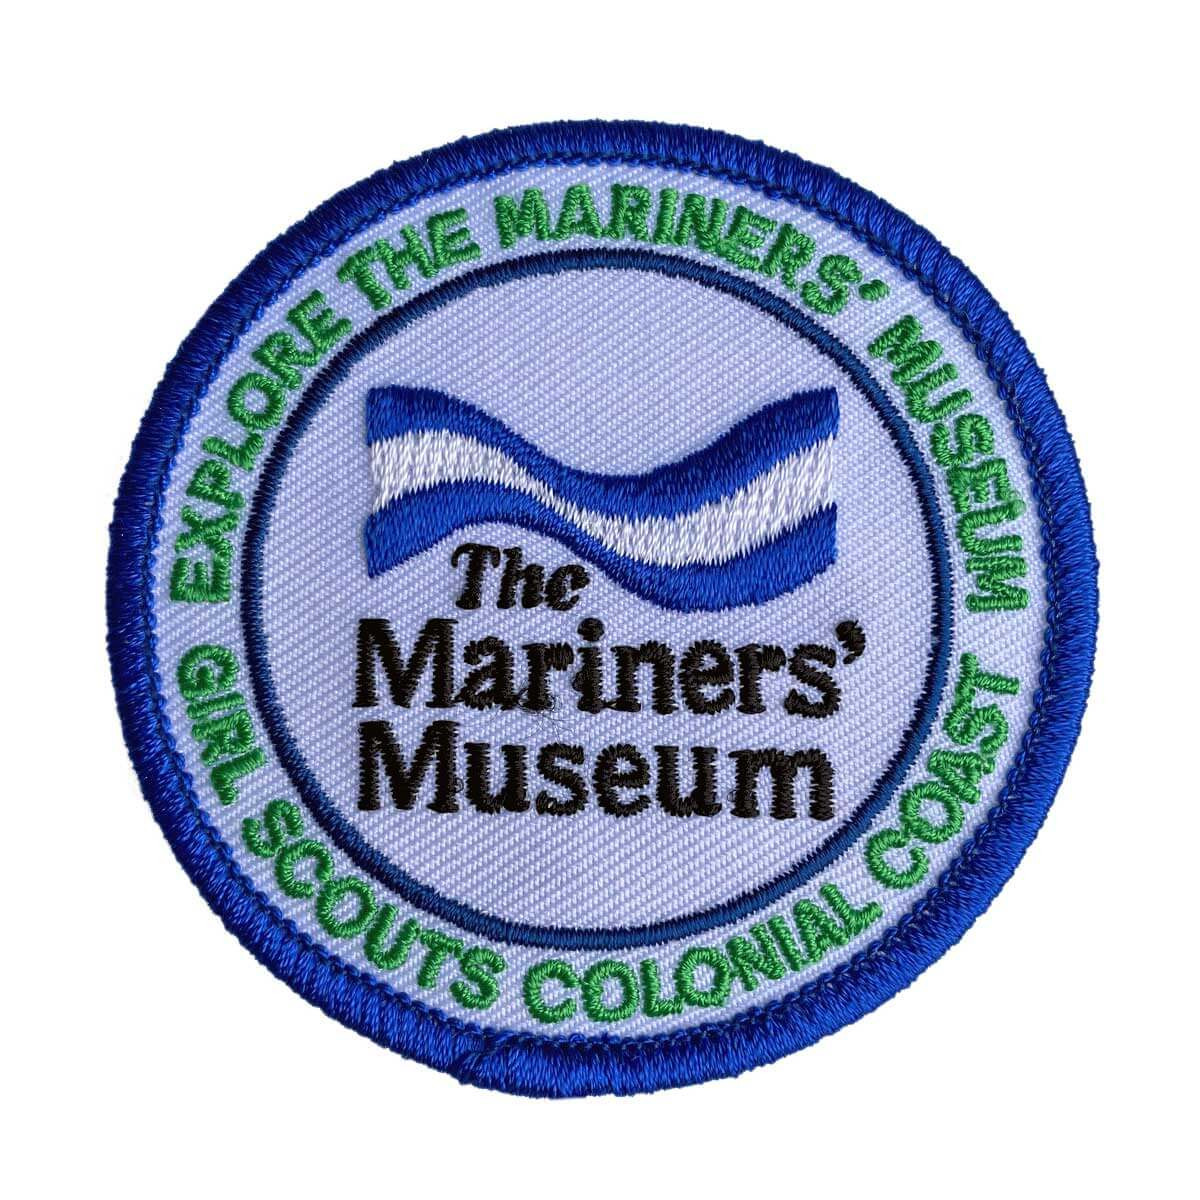 The Mariners’ Museum